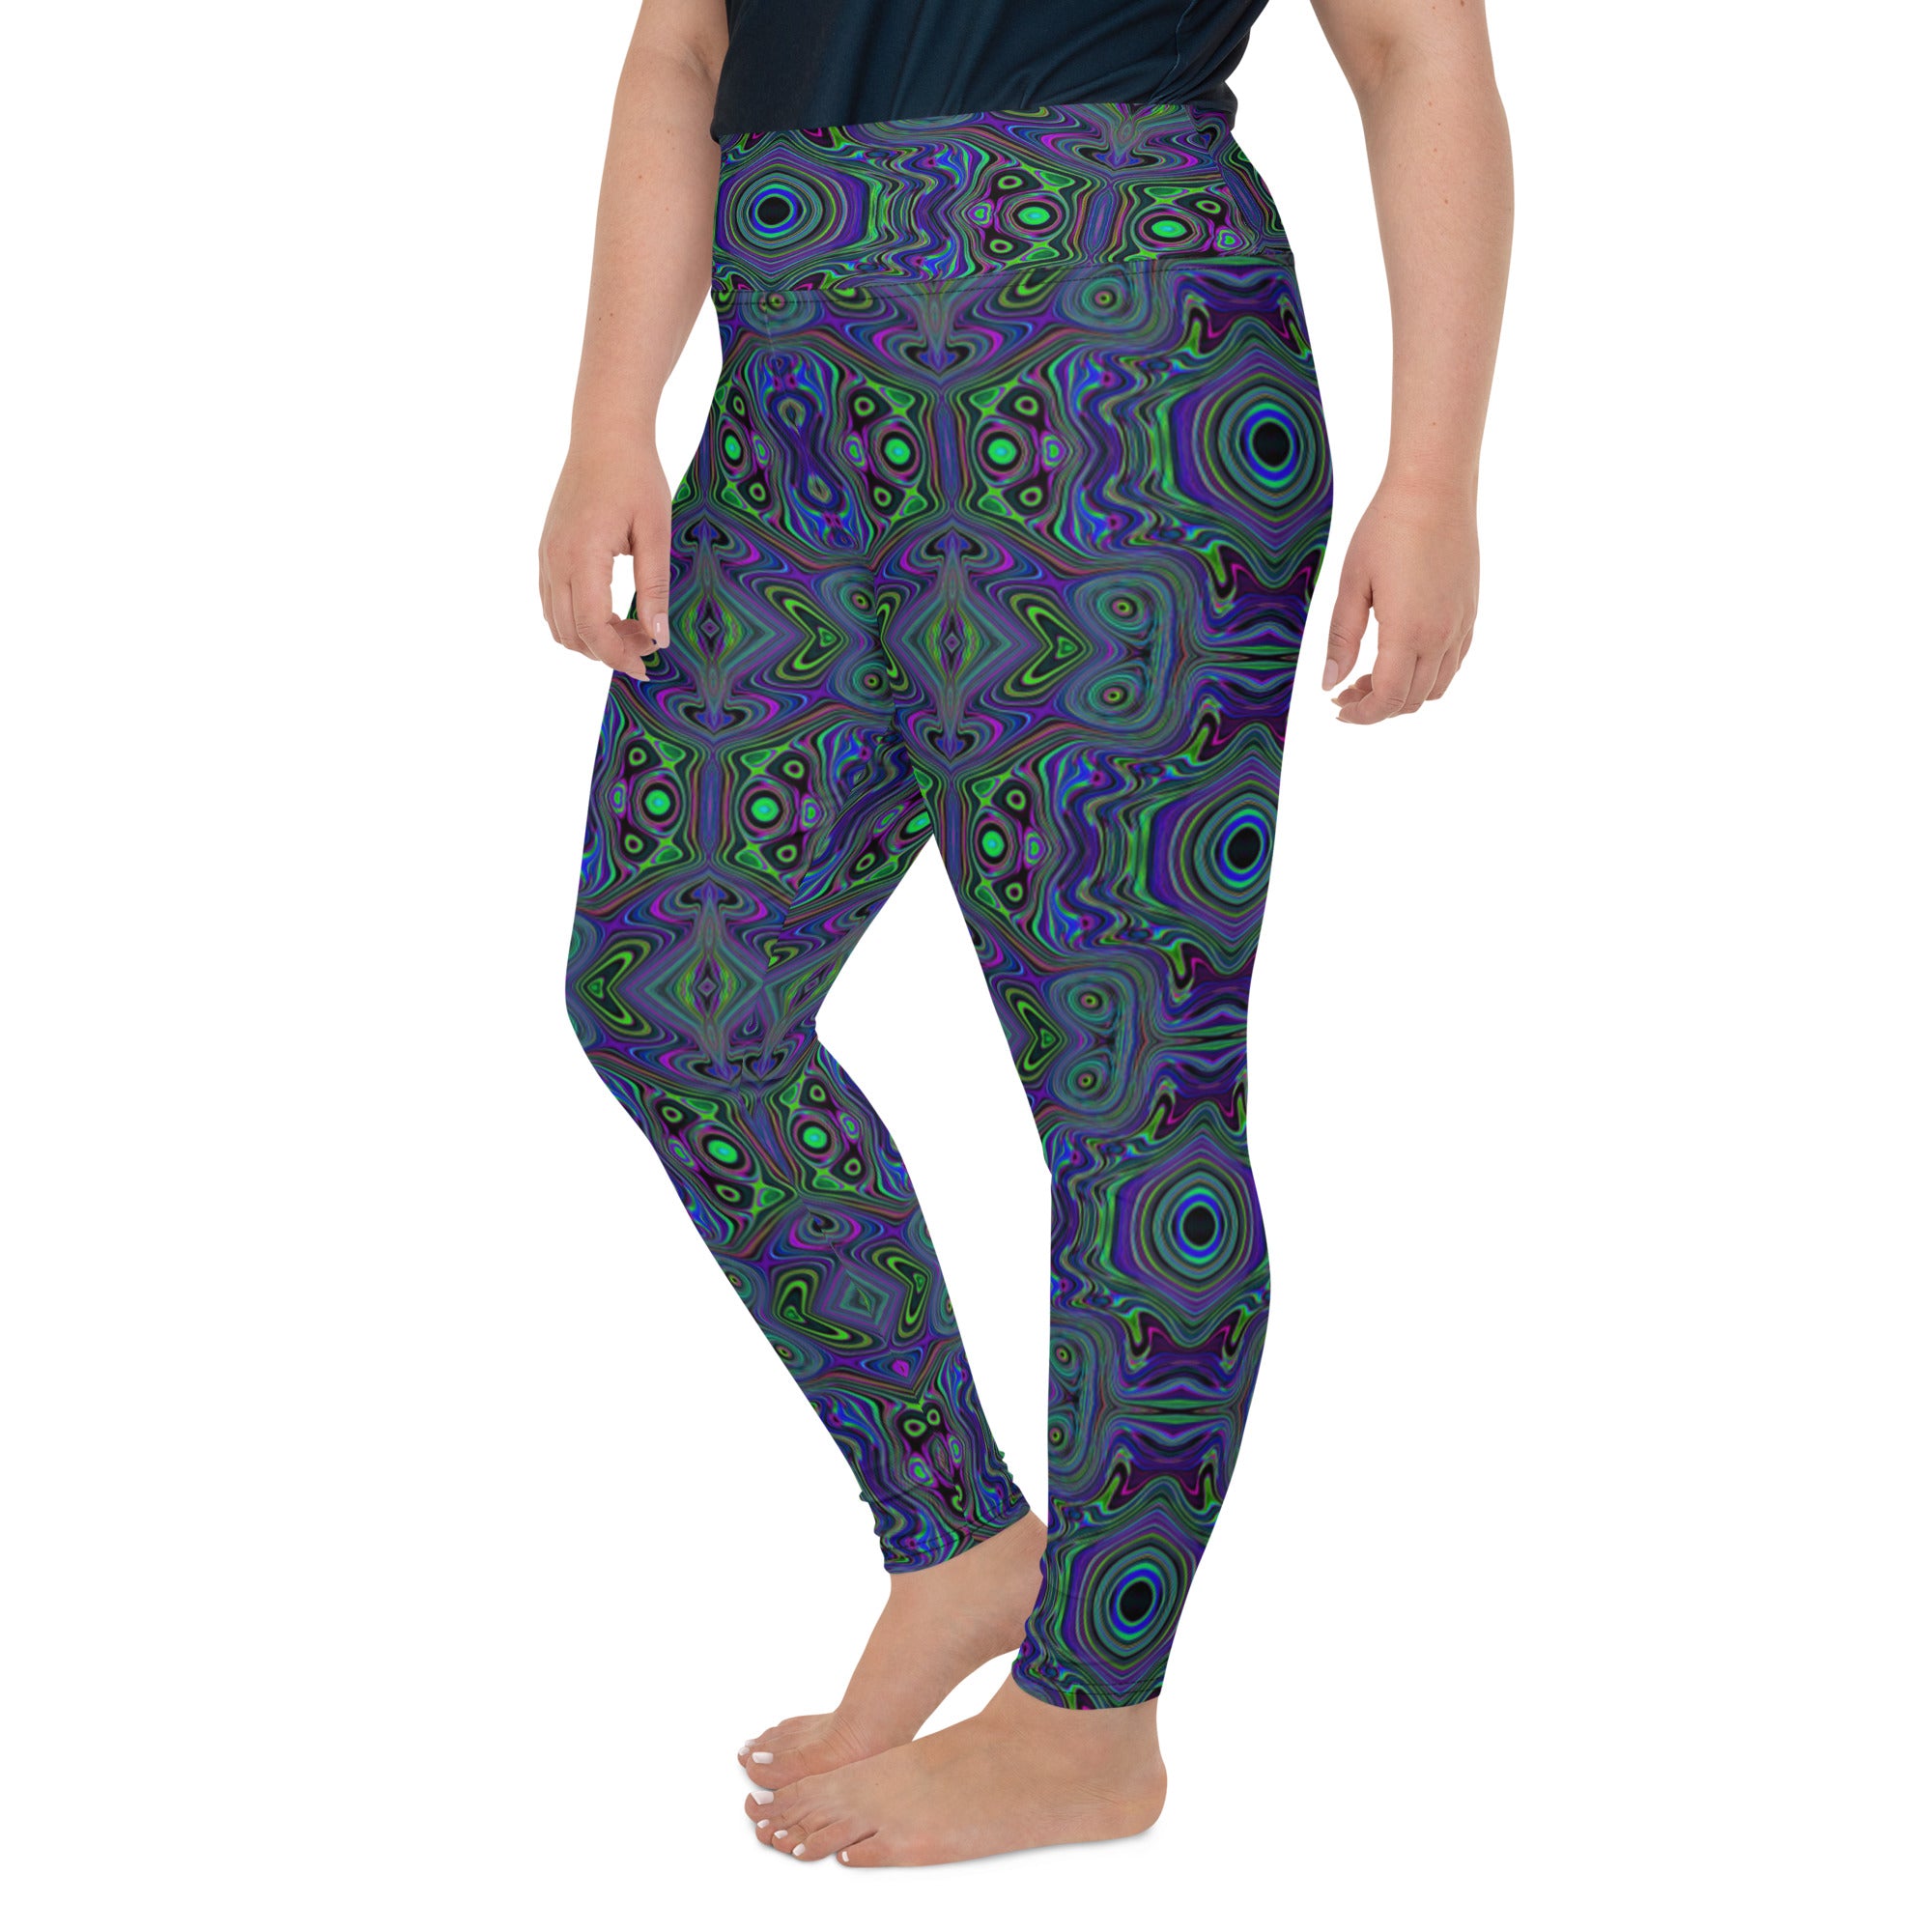 Plus Size Leggings, Trippy Retro Royal Blue and Lime Green Abstract